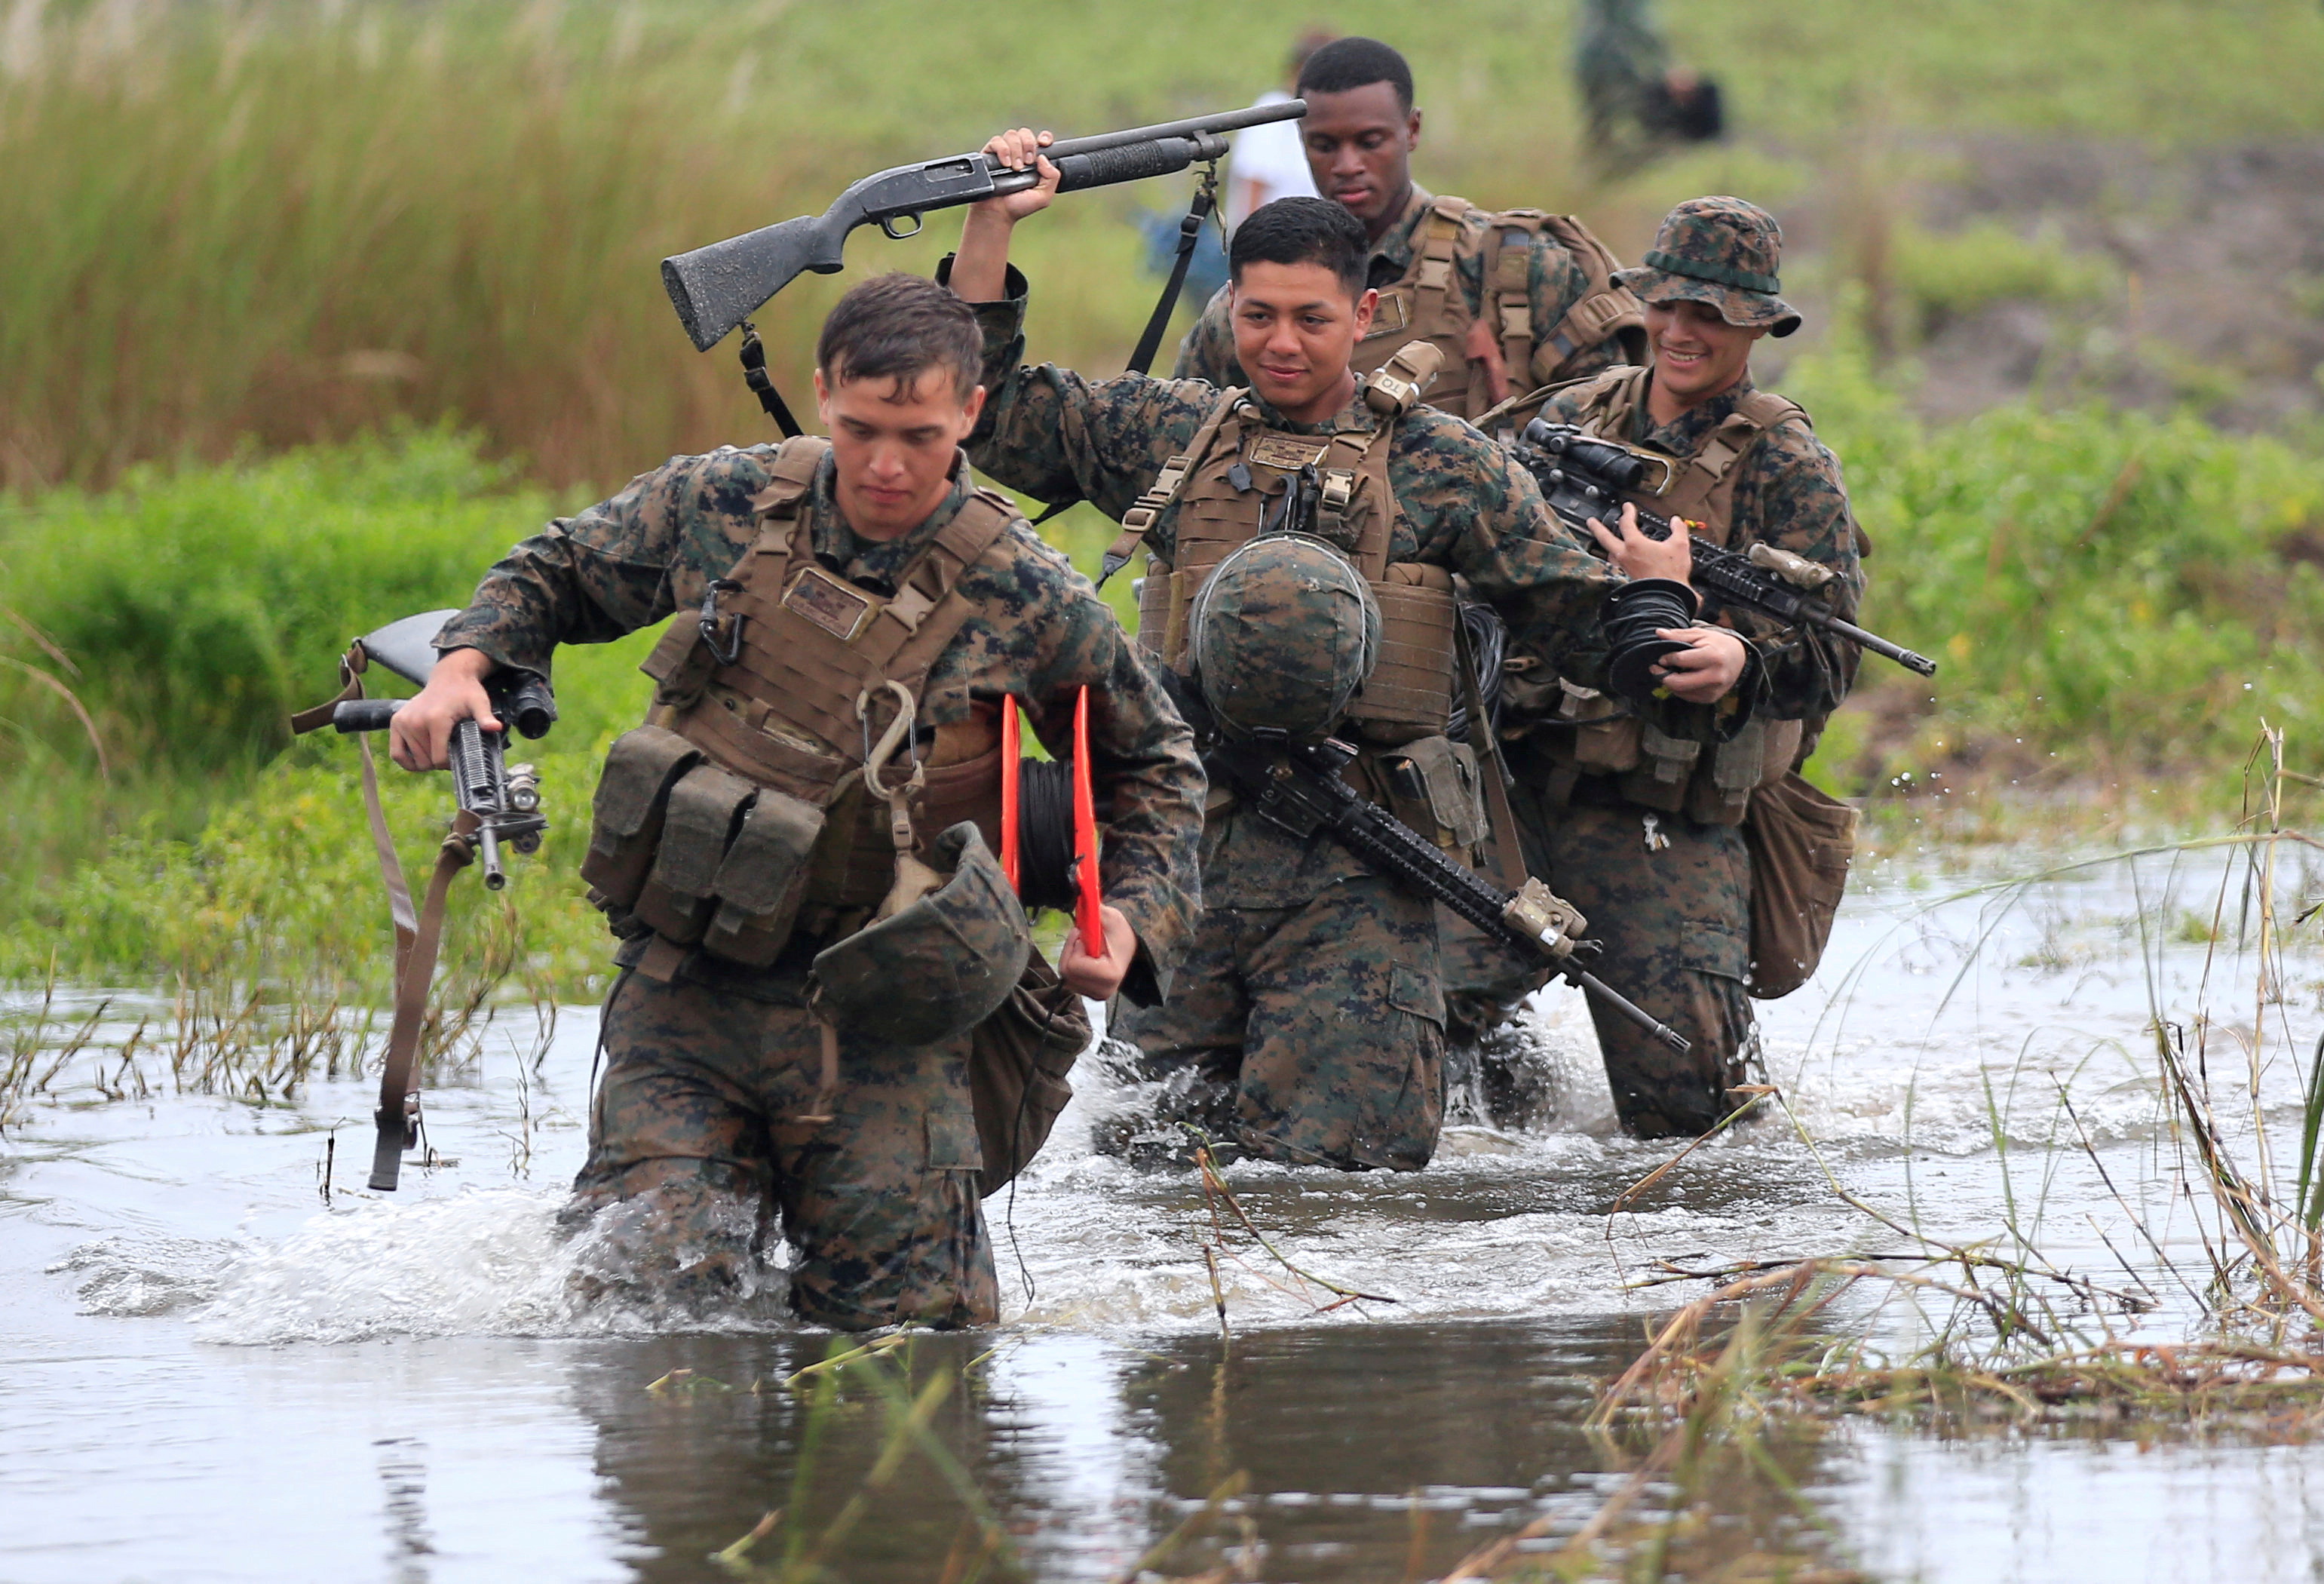 U.S. military forces cross a flooded area near the shore during the annual Philippines-US amphibious landing exercise (PHIBLEX) at San Antonio